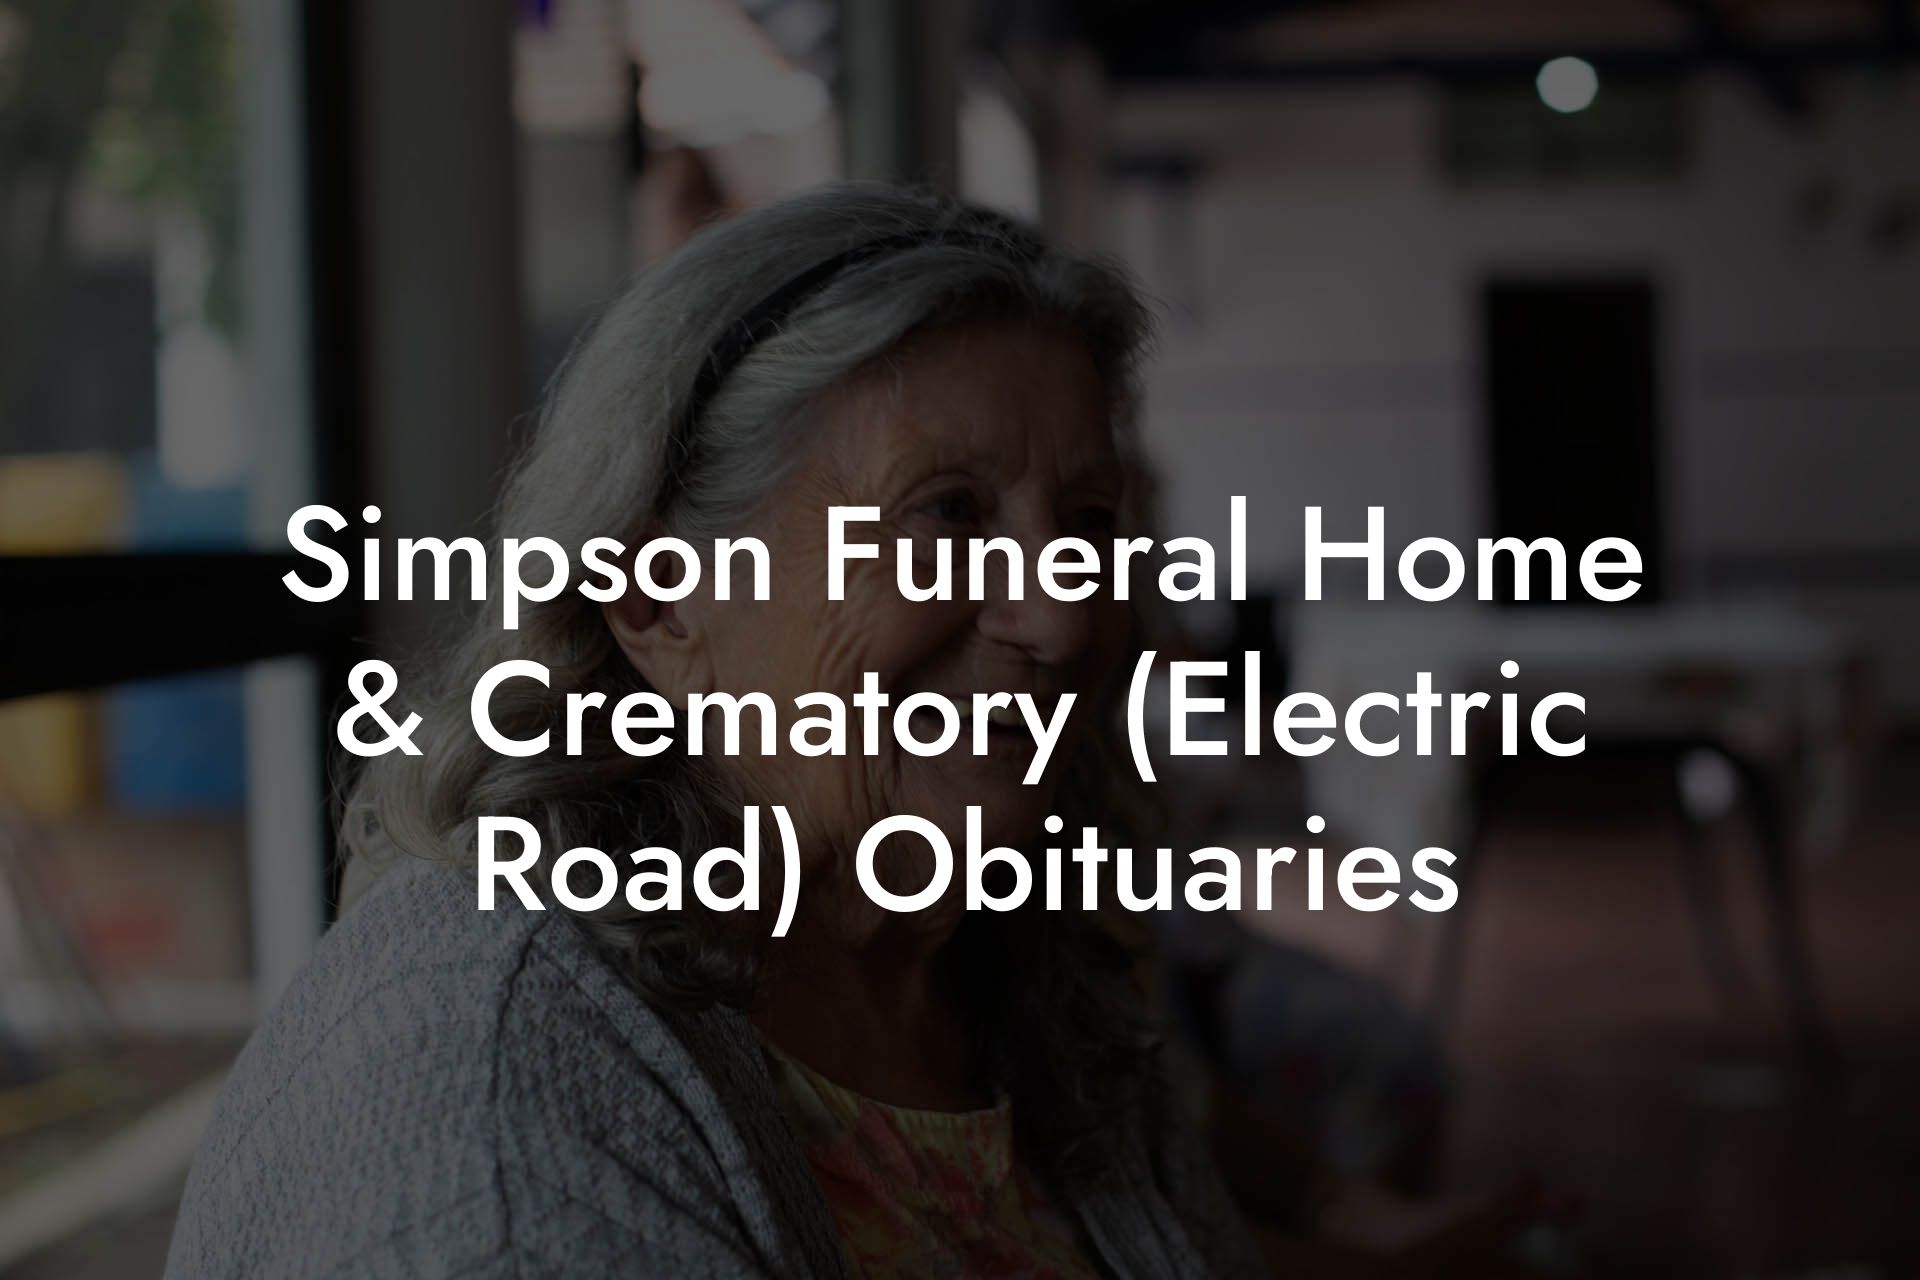 Simpson Funeral Home & Crematory (Electric Road) Obituaries